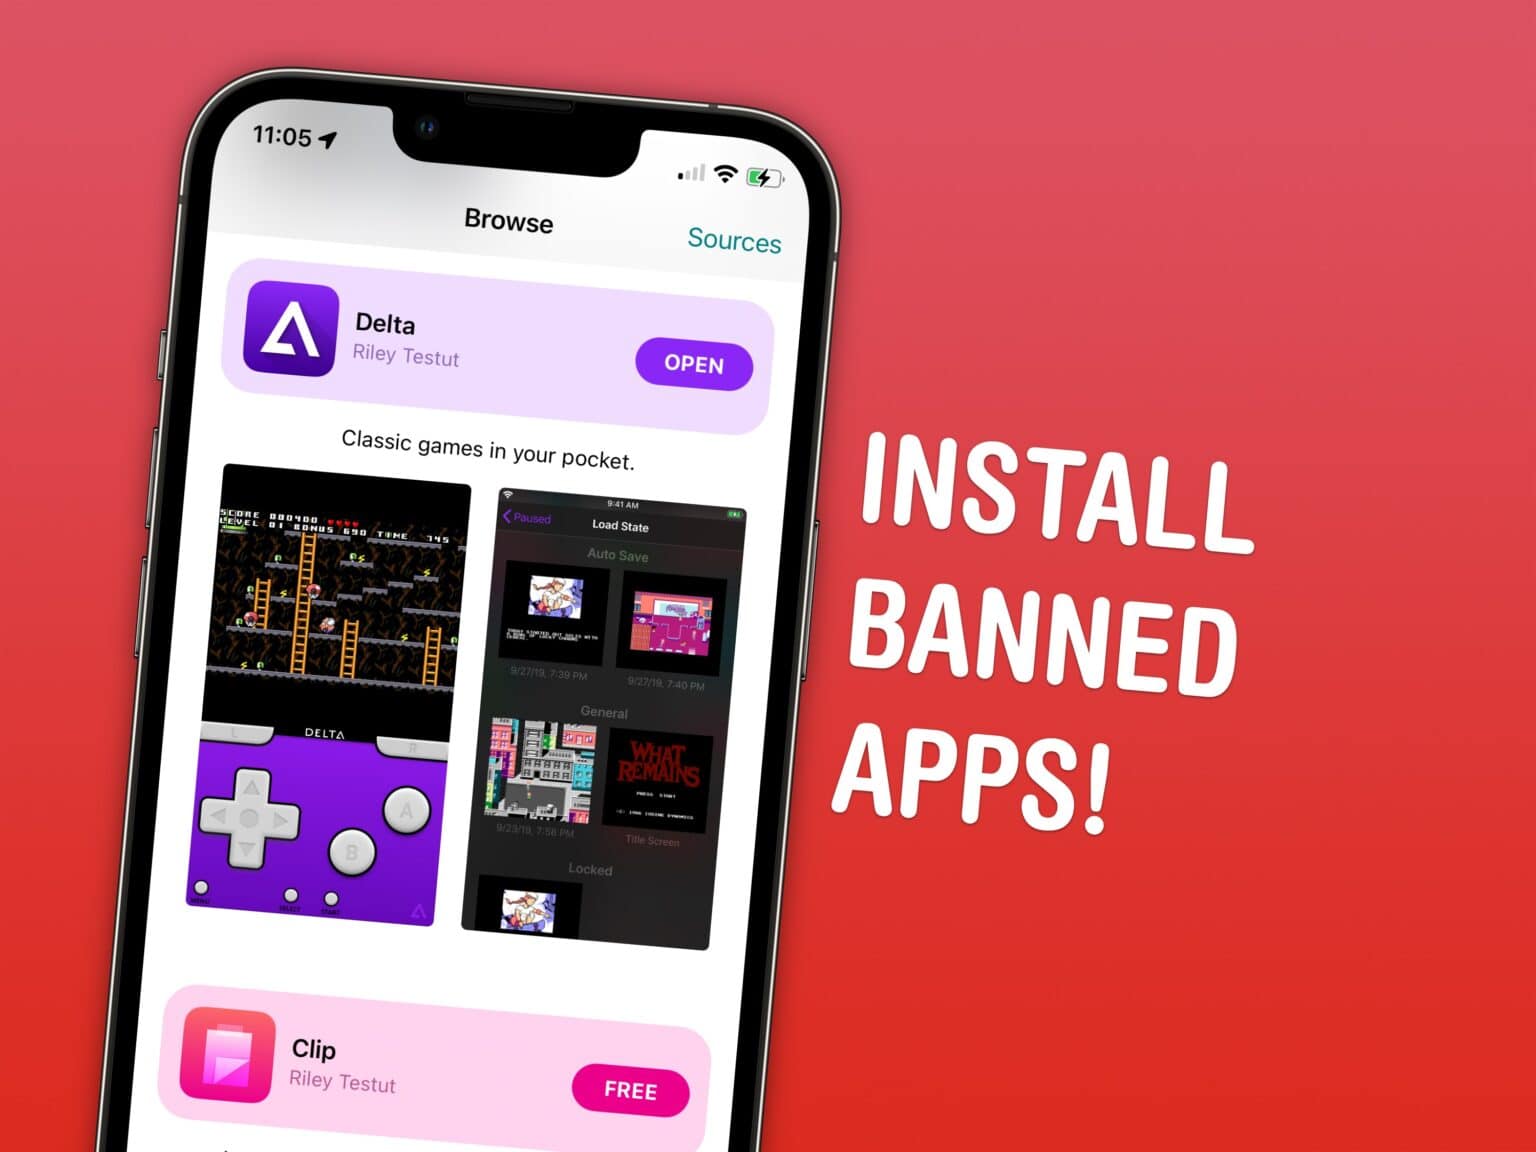 Install the apps Apple doesn’t want on the App Store with AltStore.